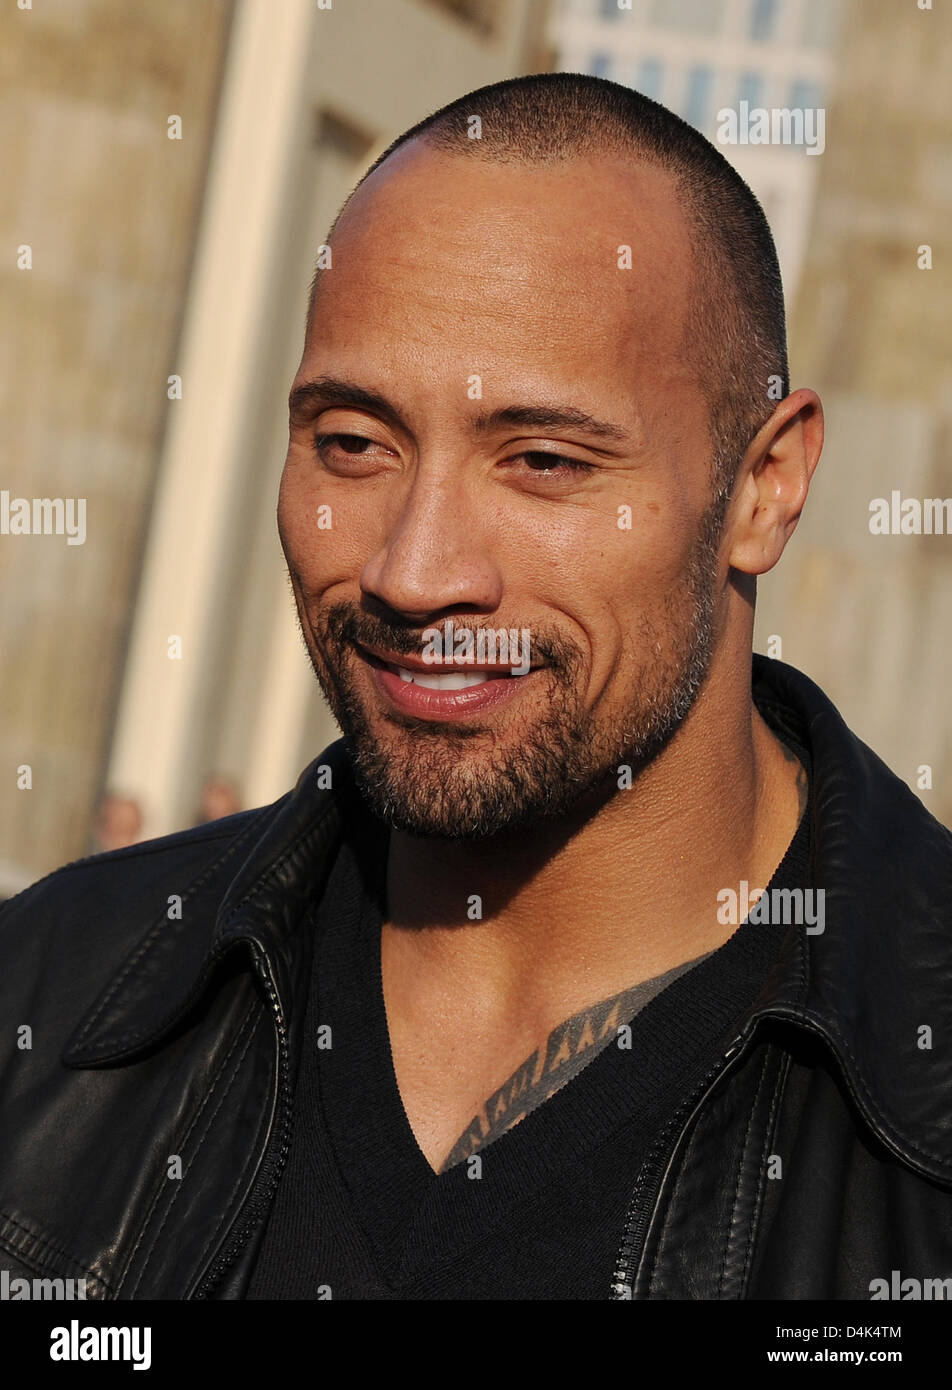 US actor Dwayne Johnson portrayed during a photo call on the occasion of the upcoming Germany premiere of his movie ?Race to Witch Mountain? in front of Brandenburg Gate in Berlin, Germany, 31 March 2009. The film will be in German cinemas from 9 April 2009 on. Photo: Jens Kalaene Stock Photo